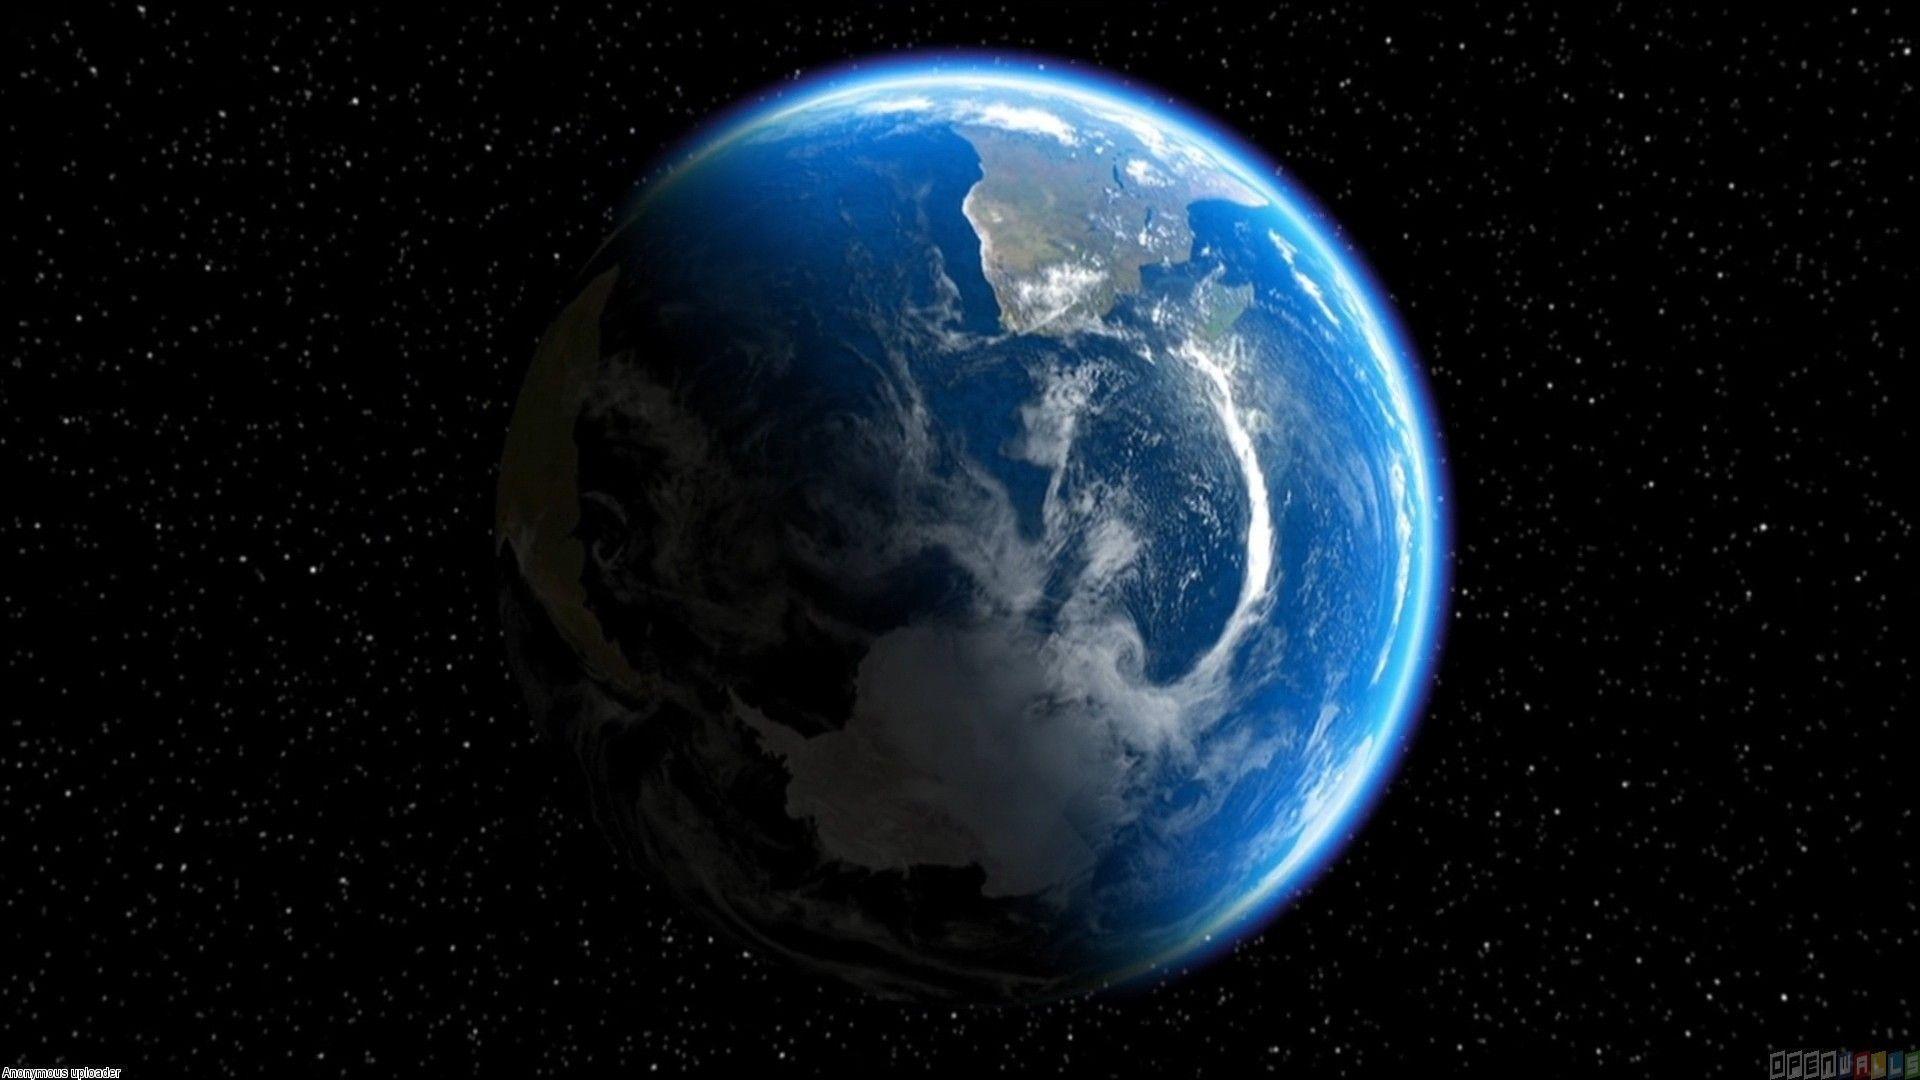 stocks at Planet Earth Wallpaper group